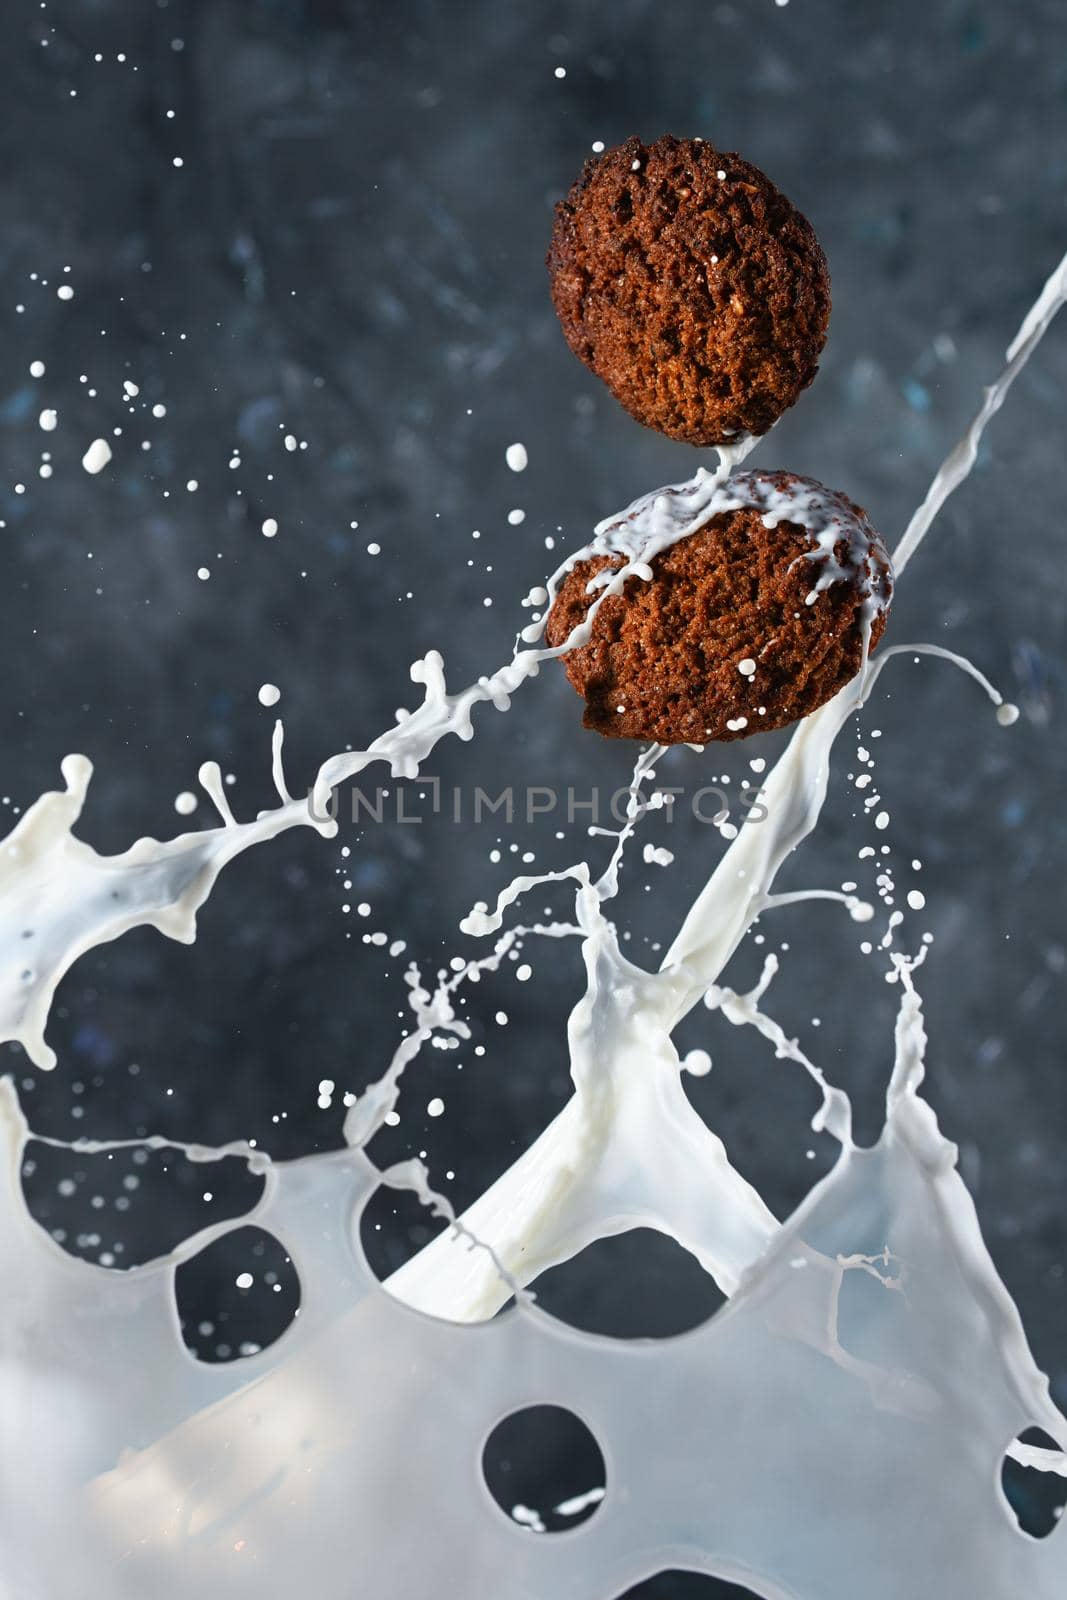 Oatmeal cookies with milk splashes on gray background. levitation